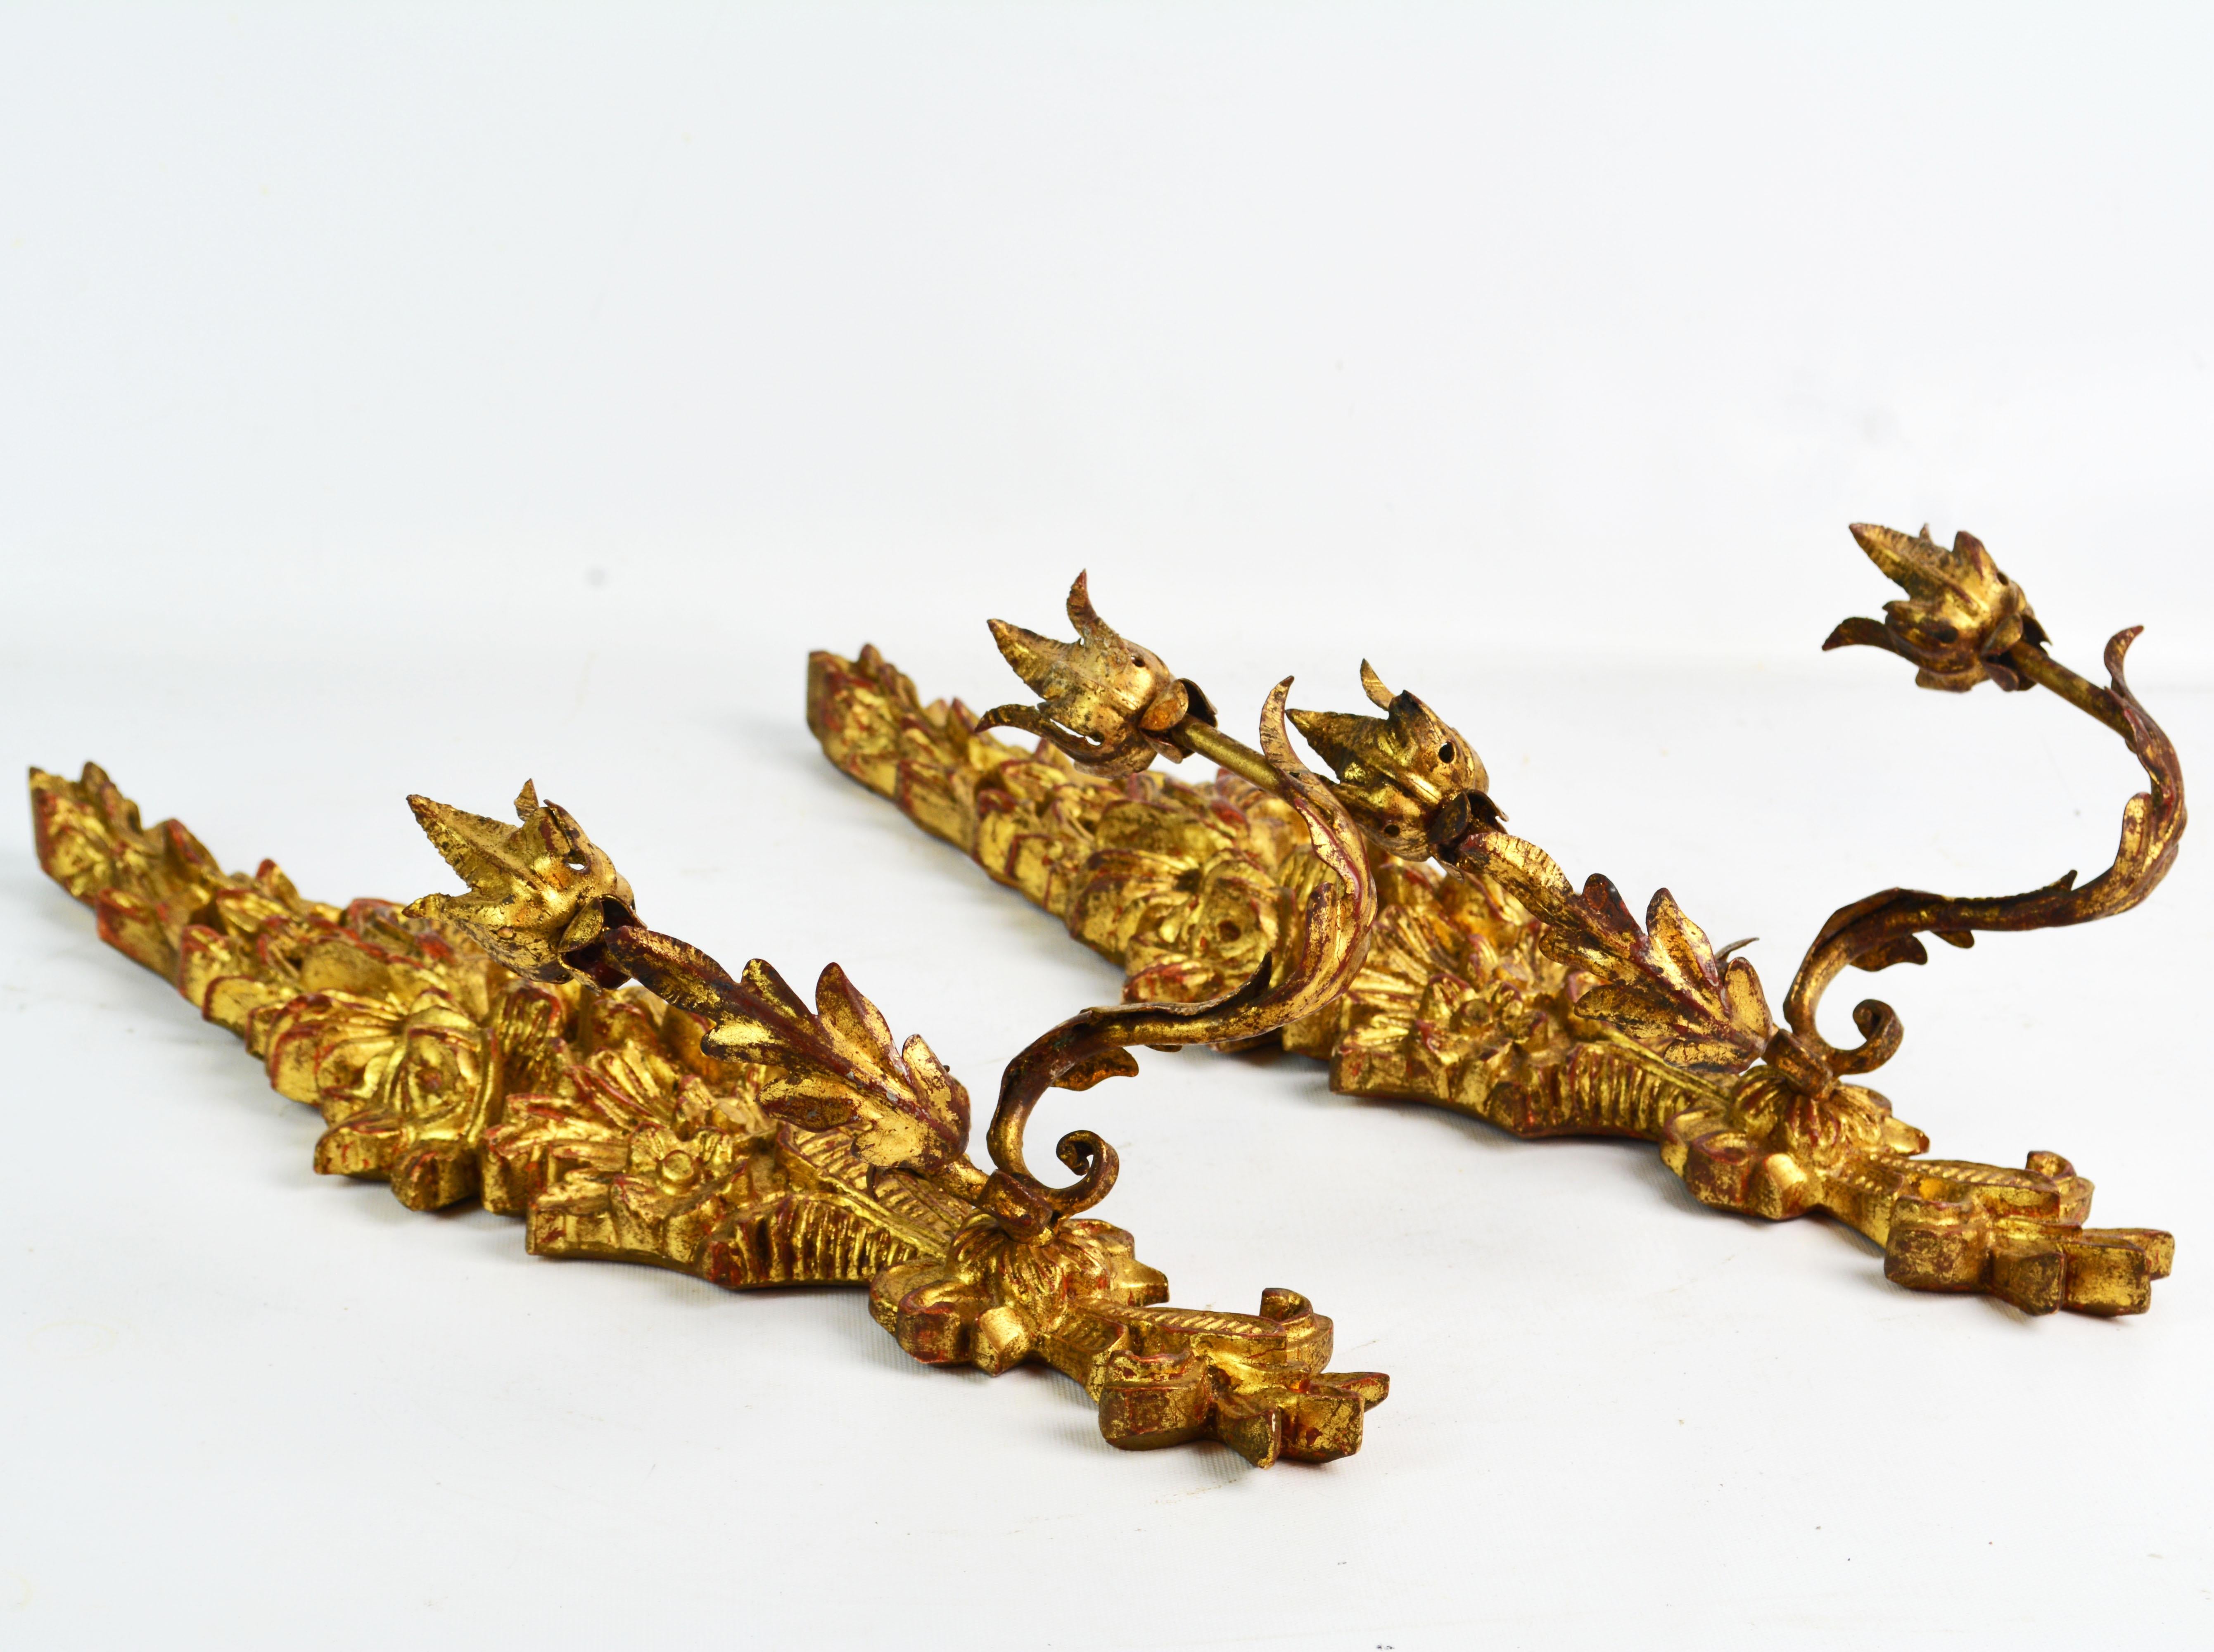 This well carved pair of Louis XV style wall sconces are made by the legendary Palladio firm in Italy in the mid-20th century. The feature a main body carved with foliage and scrolls in the Rococo style and two gilt metal light arms with applied